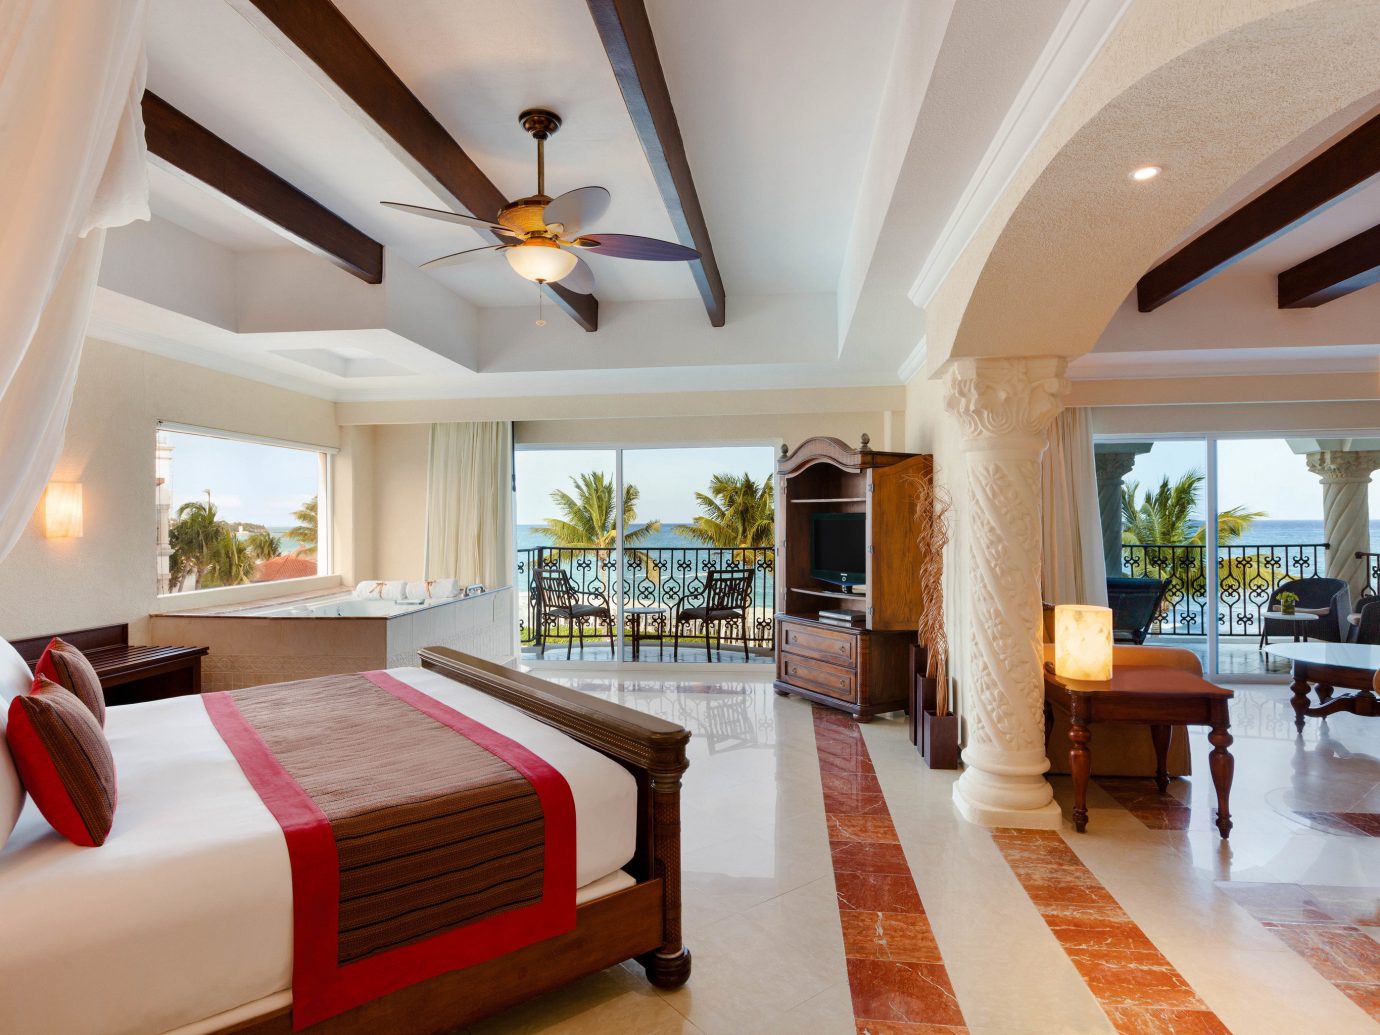 All-inclusive All-Inclusive Resorts Mexico Riviera Maya, Mexico indoor floor wall room Living ceiling window estate interior design furniture real estate Suite living room Resort white penthouse apartment Villa decorated nice hotel Modern Bedroom wood